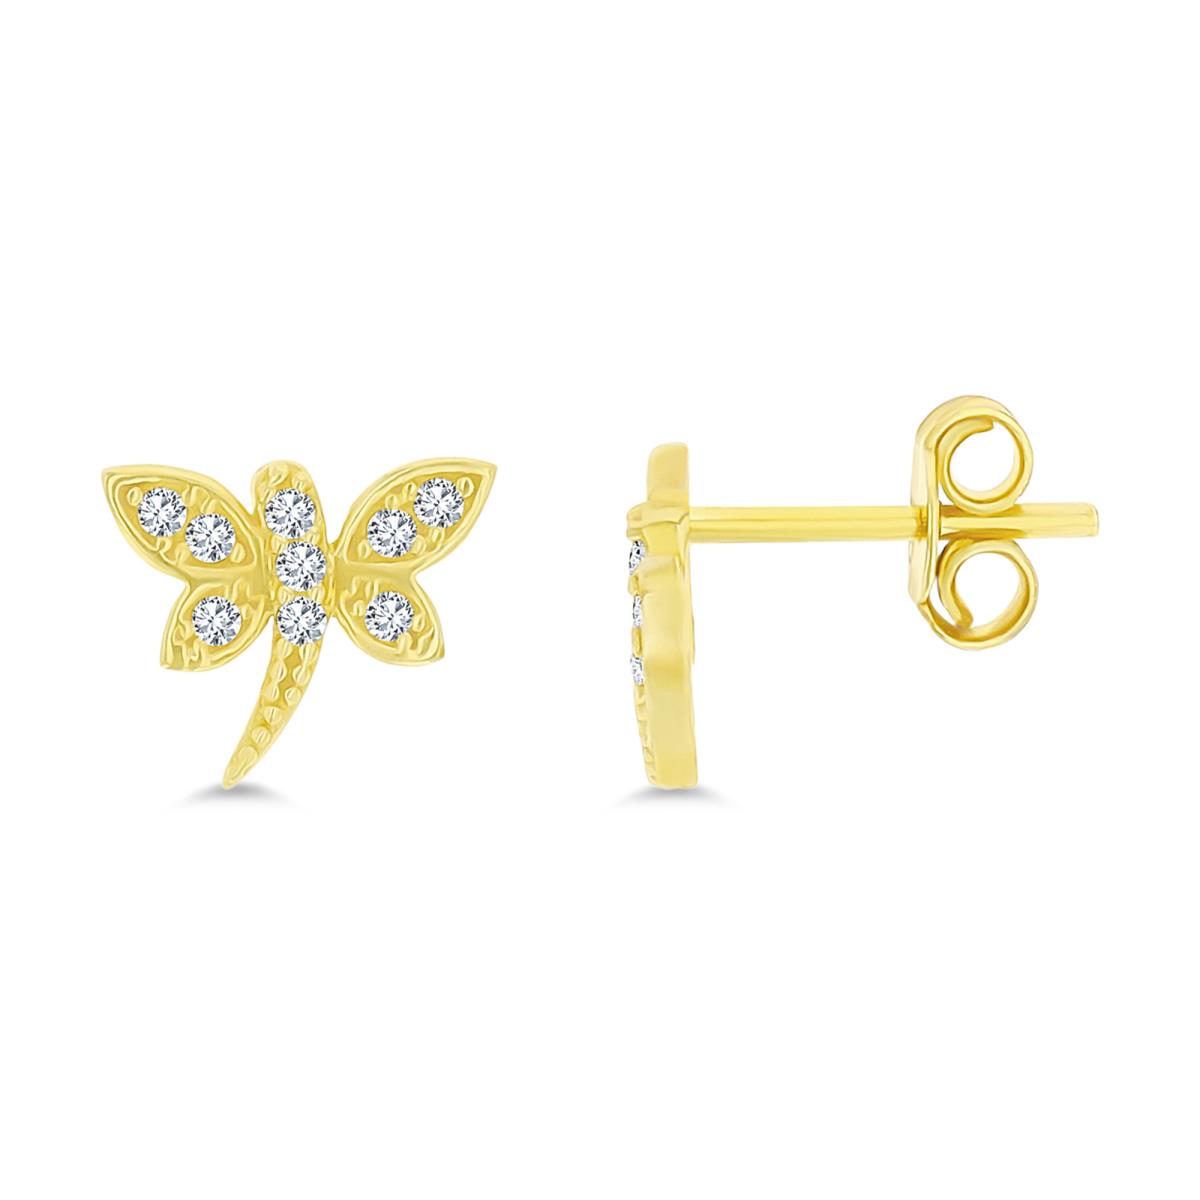 14K Yellow Gold Micropave CZ Dragonfly Stud Earring with Clutch Back